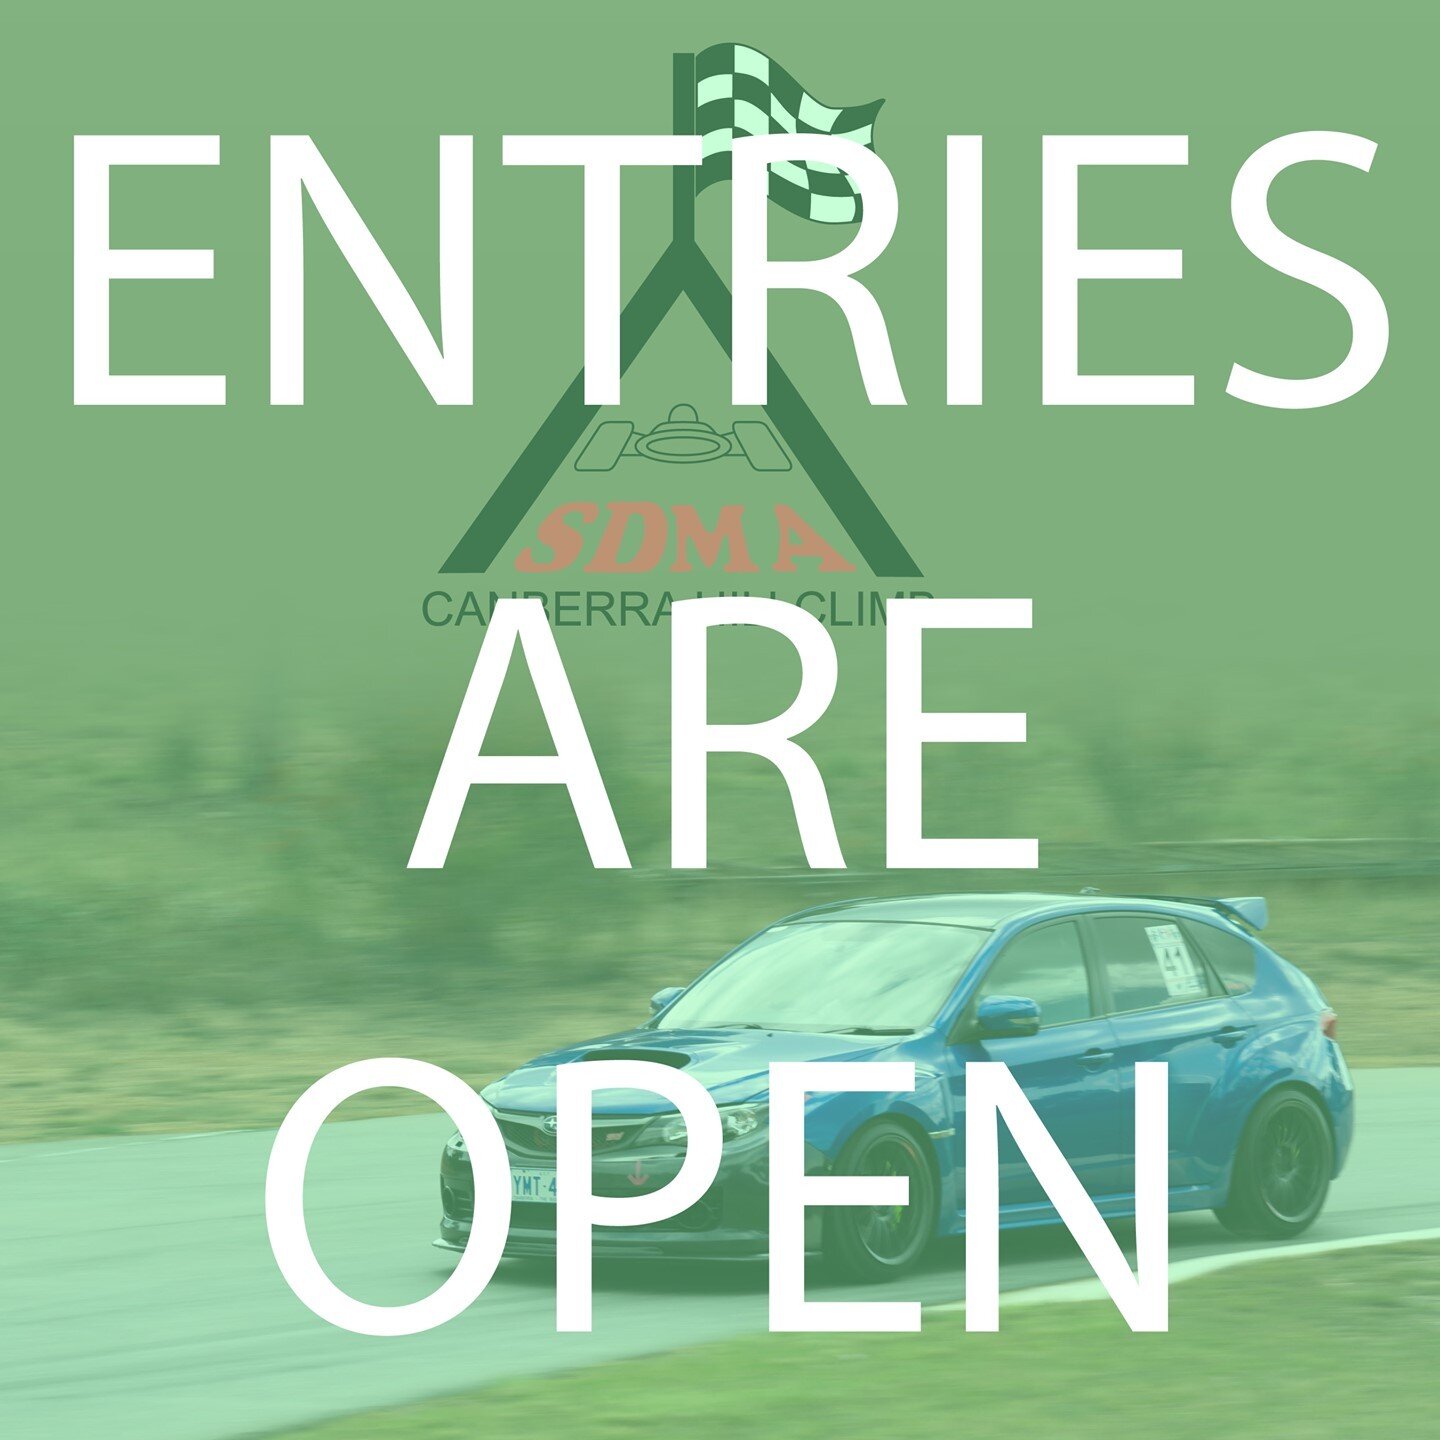 Entries are open for the one lap hillclimb on Sunday 11 April 2021.

Entry is open to all club members unless:
- You live in one of the 11 New South Wales  Local Government Areas (LGAs) designated by the ACT Government as COVID affected areas;
These 